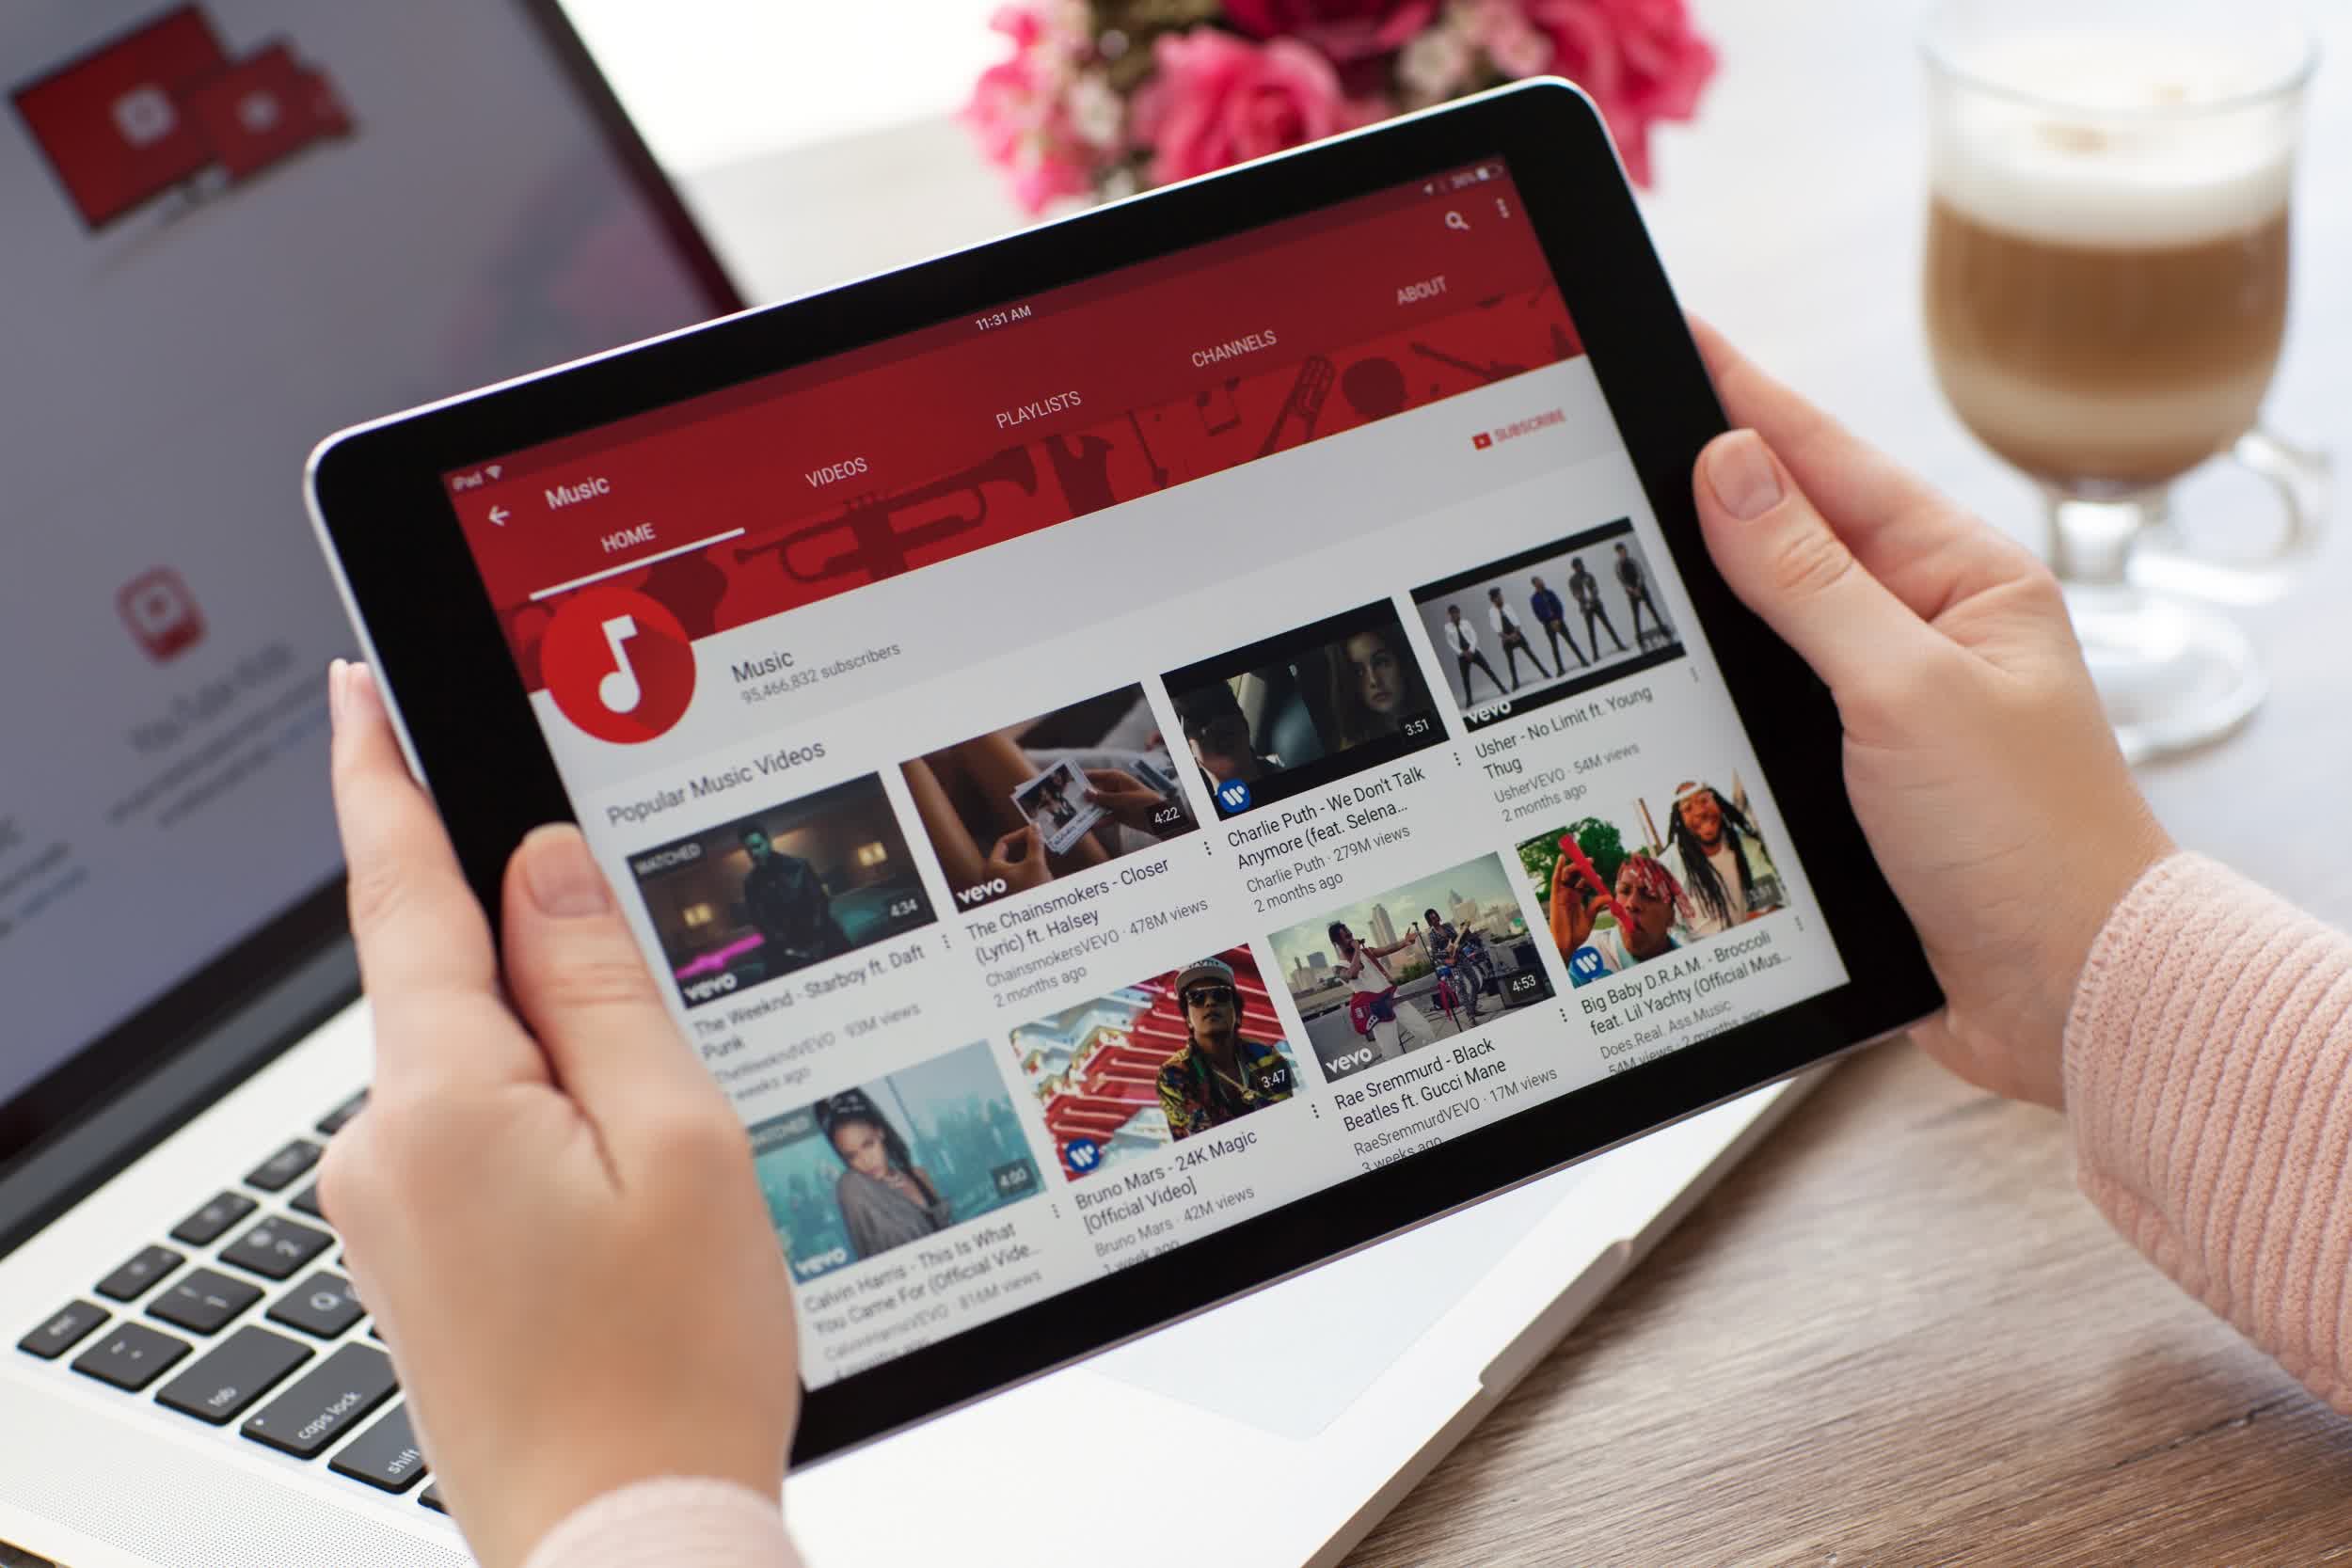 YouTube is experimenting with a tool that checks for copyright violations during video uploads